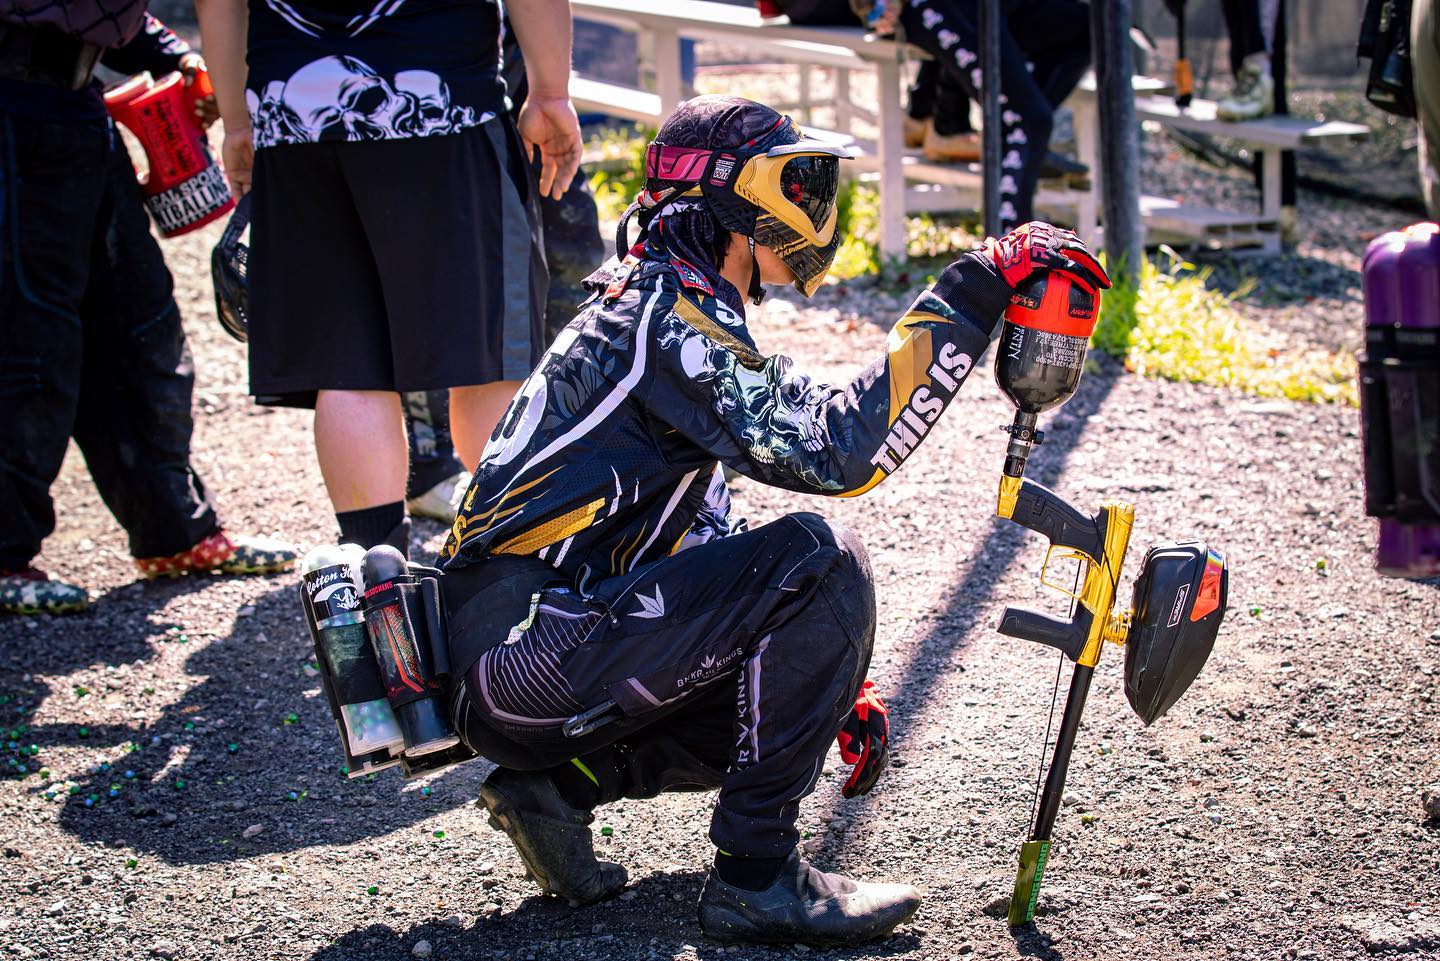 paintball player crouching